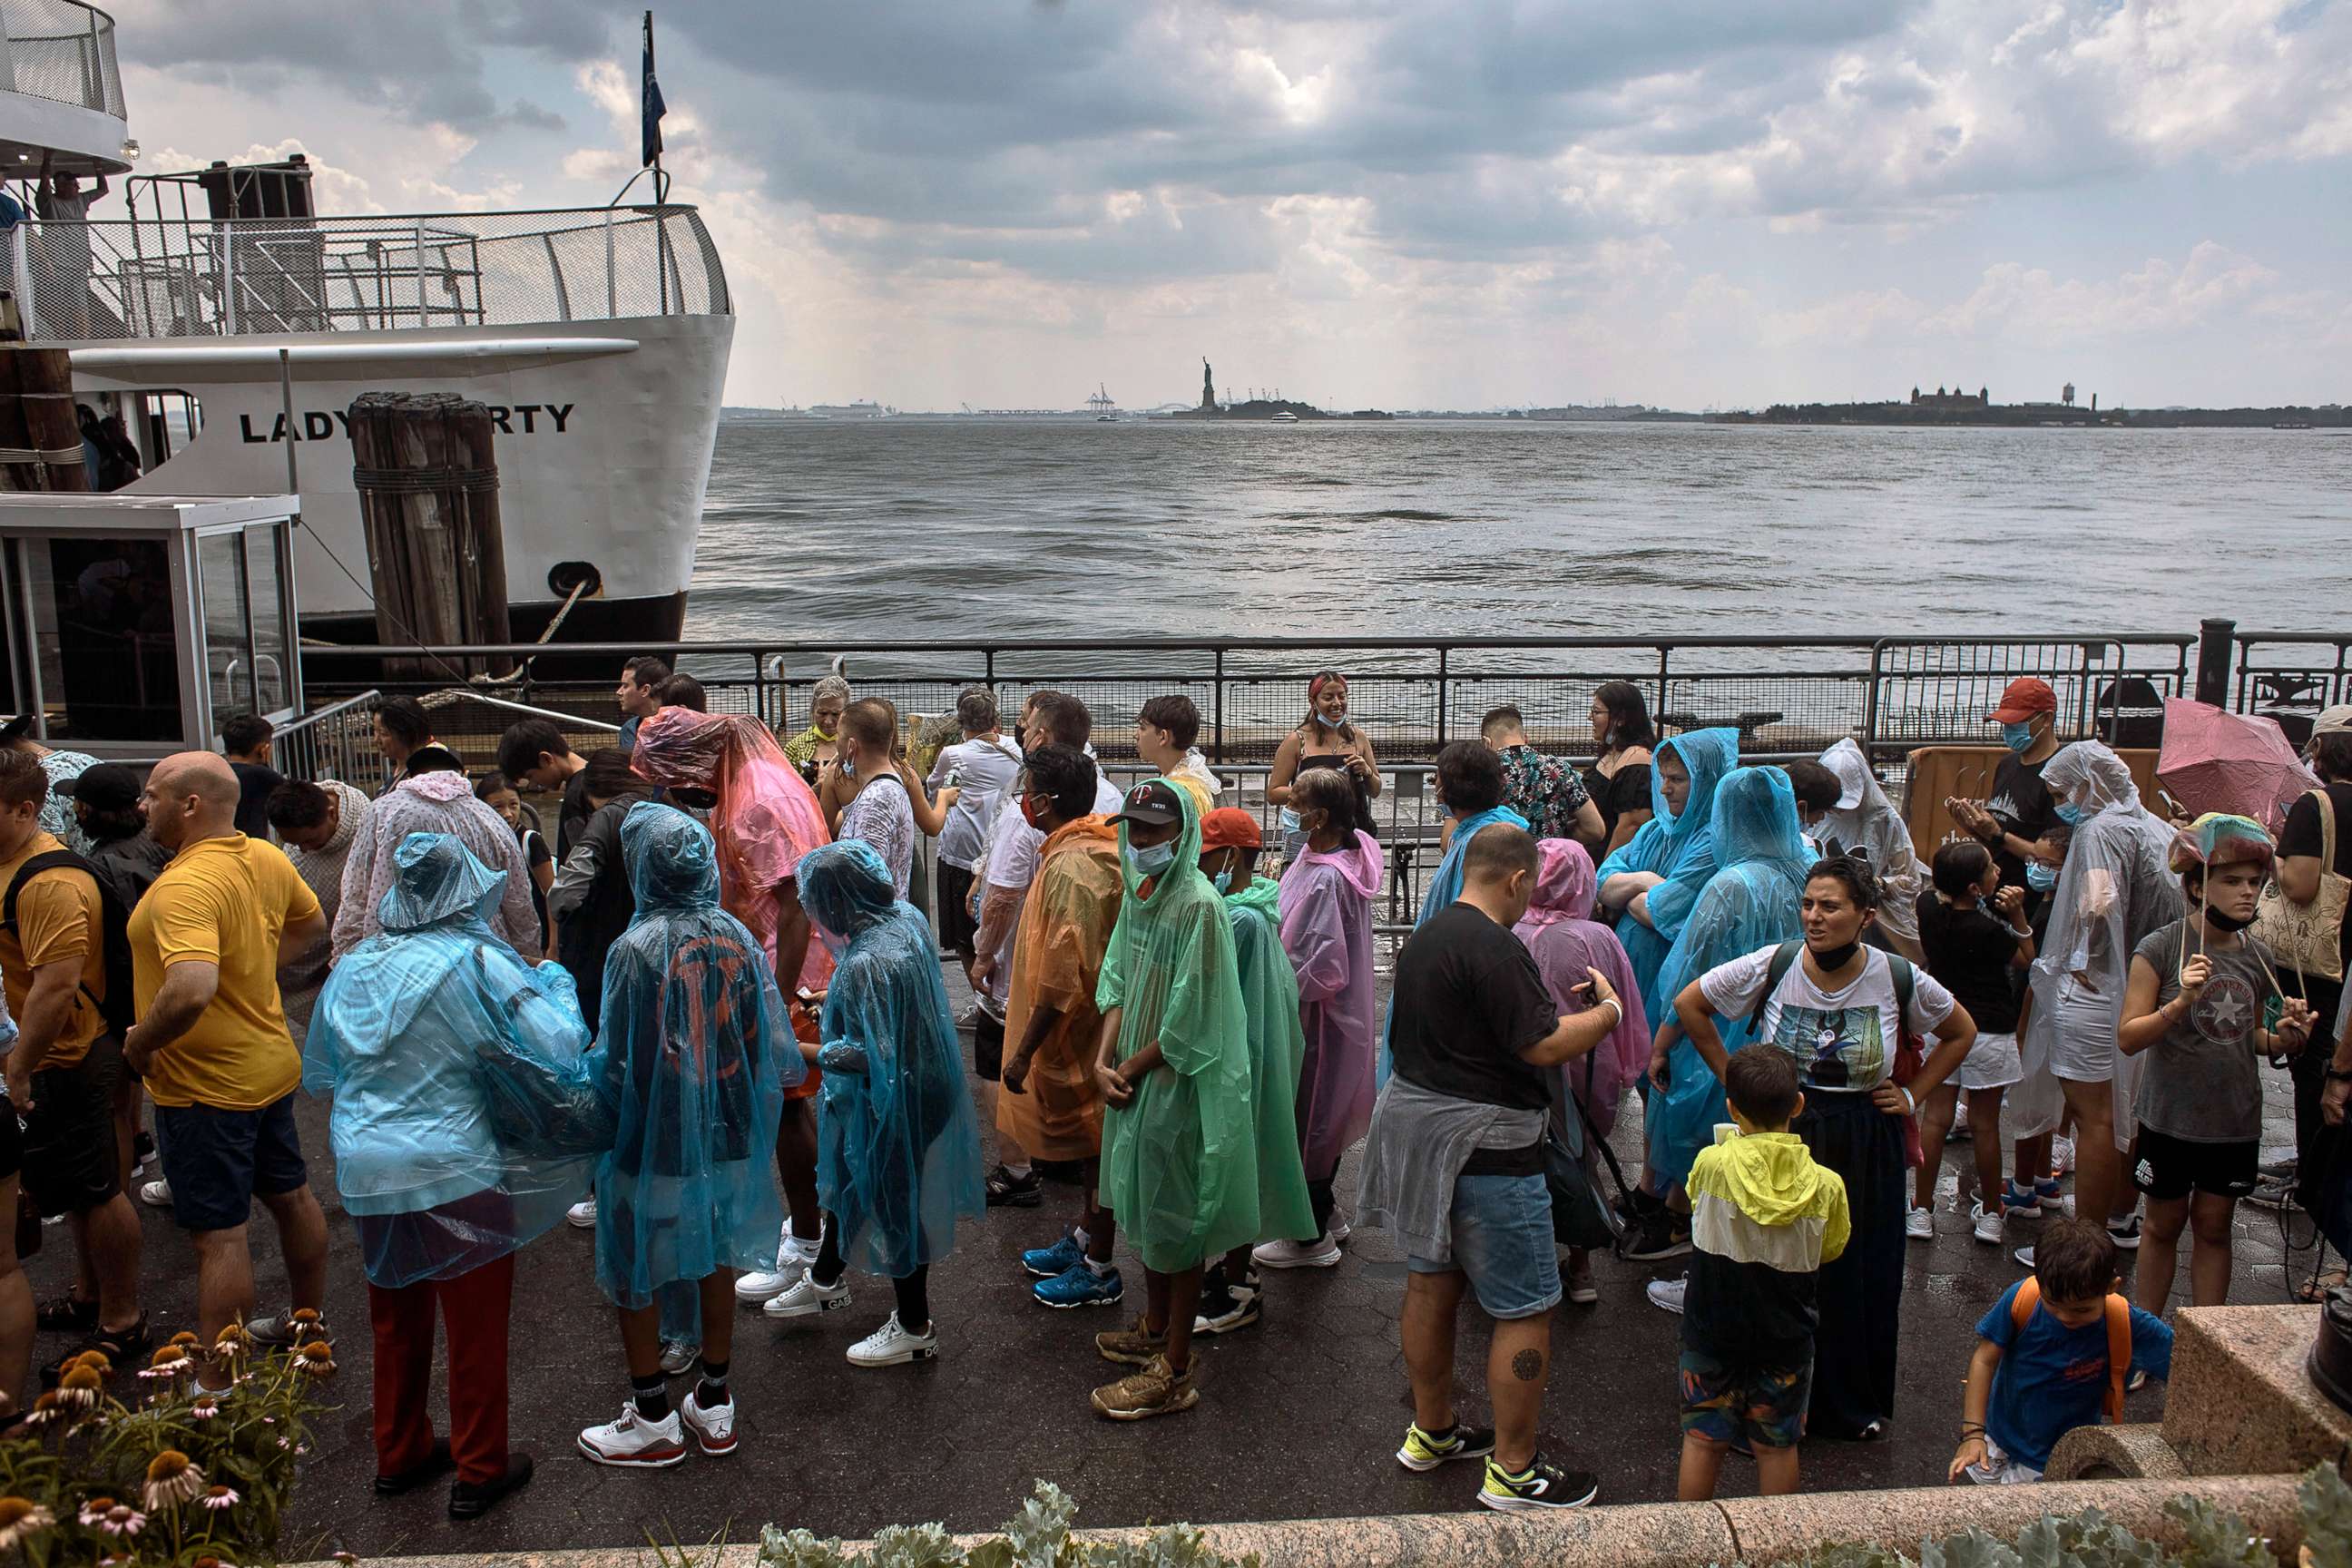 PHOTO: People wait to take a boat under the rain during a summer heat wave, Thursday, July 21, 2022, in New York.